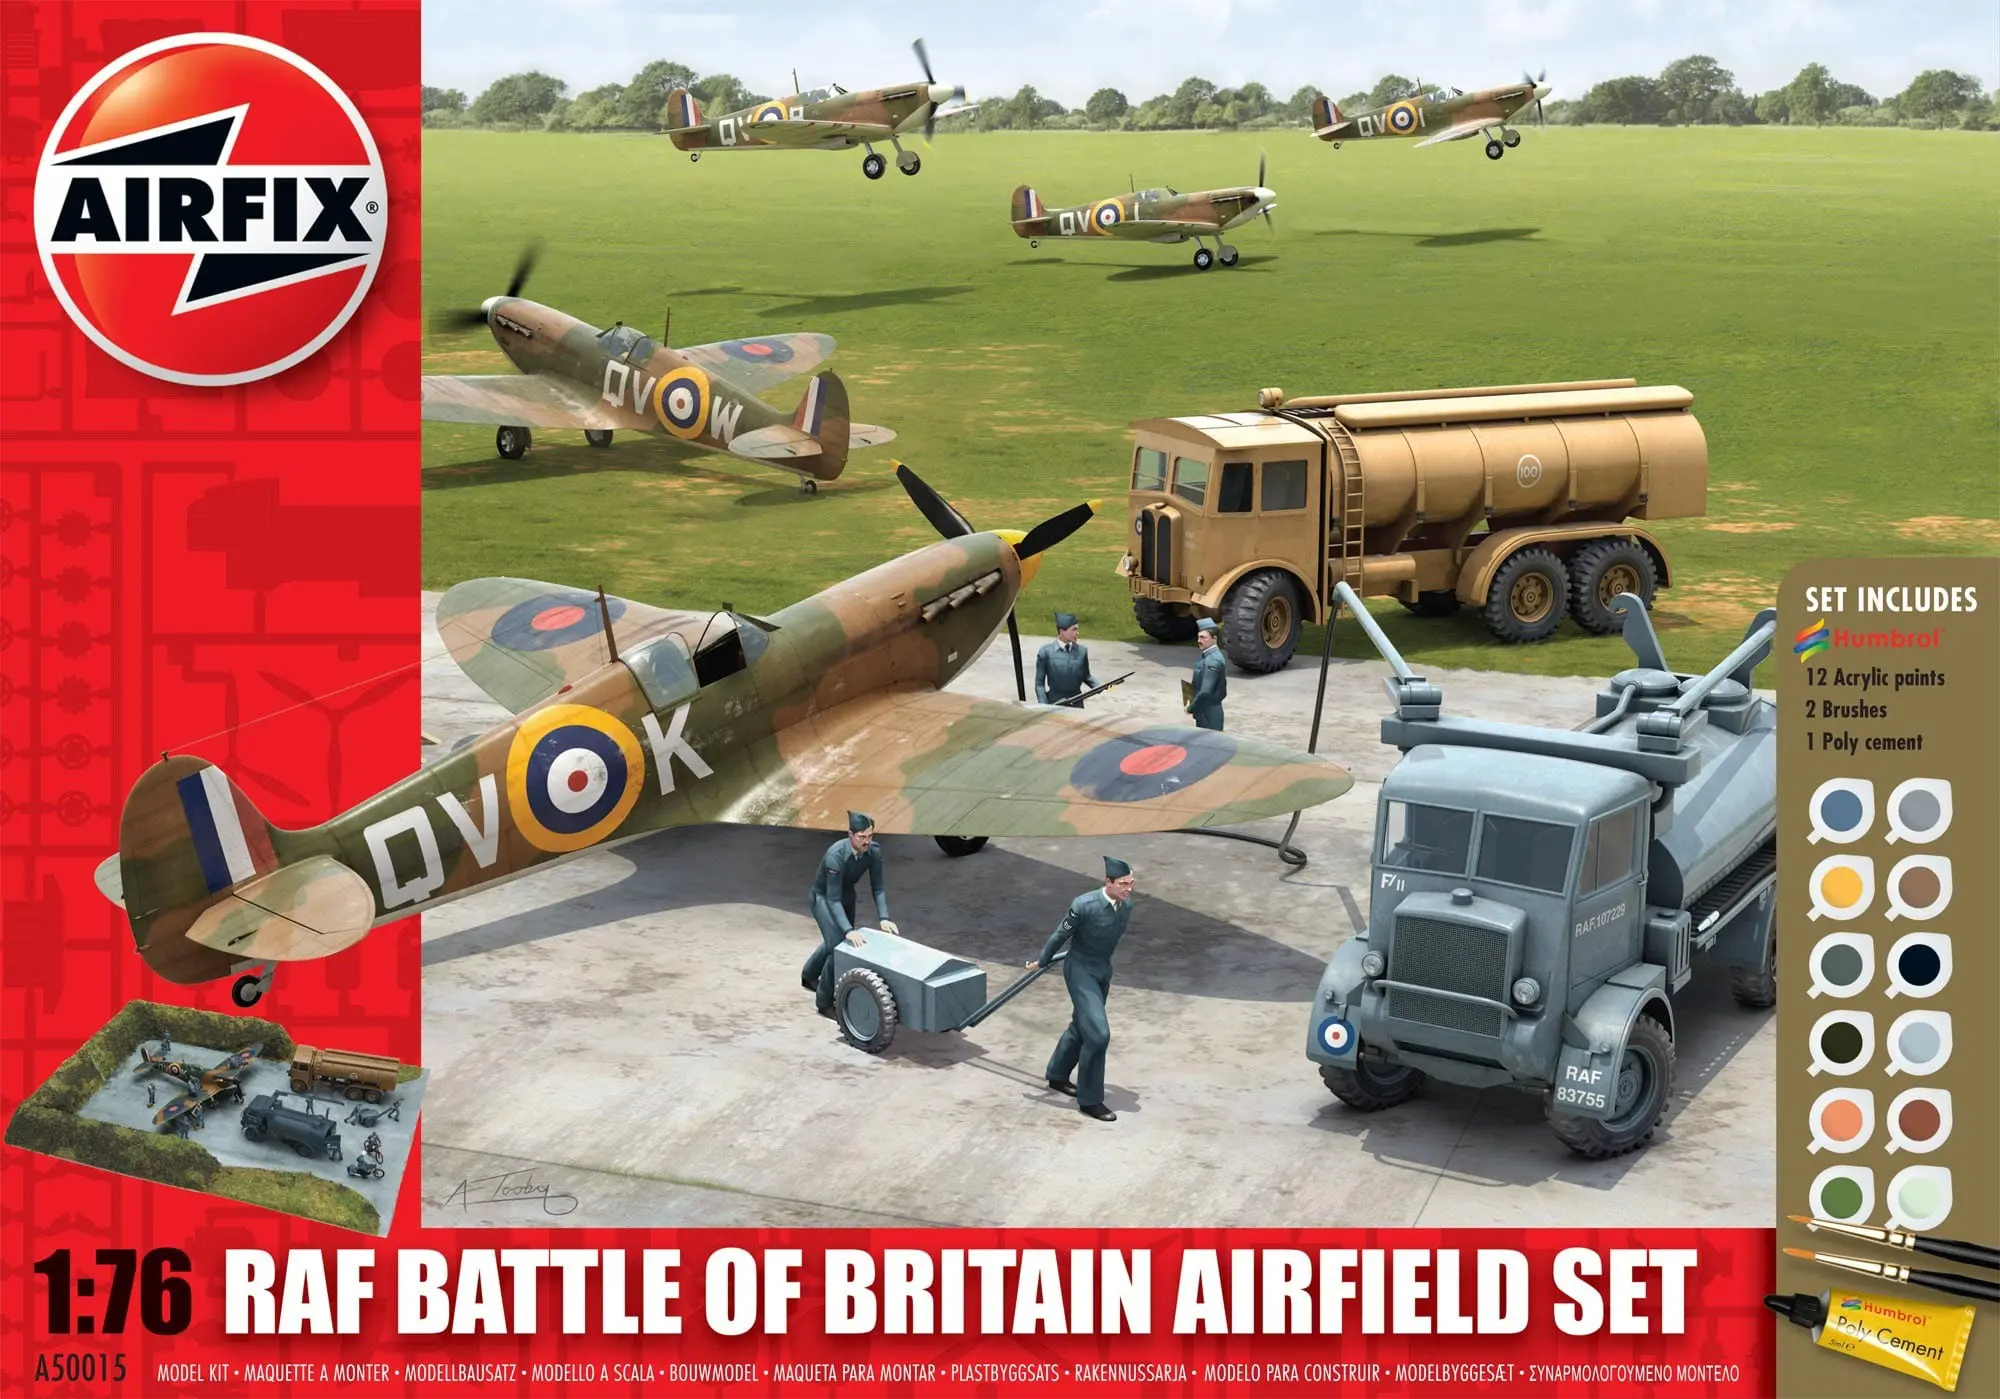 Airfix Raf Battle Of Britain Airfield Gift Set With Images | My XXX Hot ...